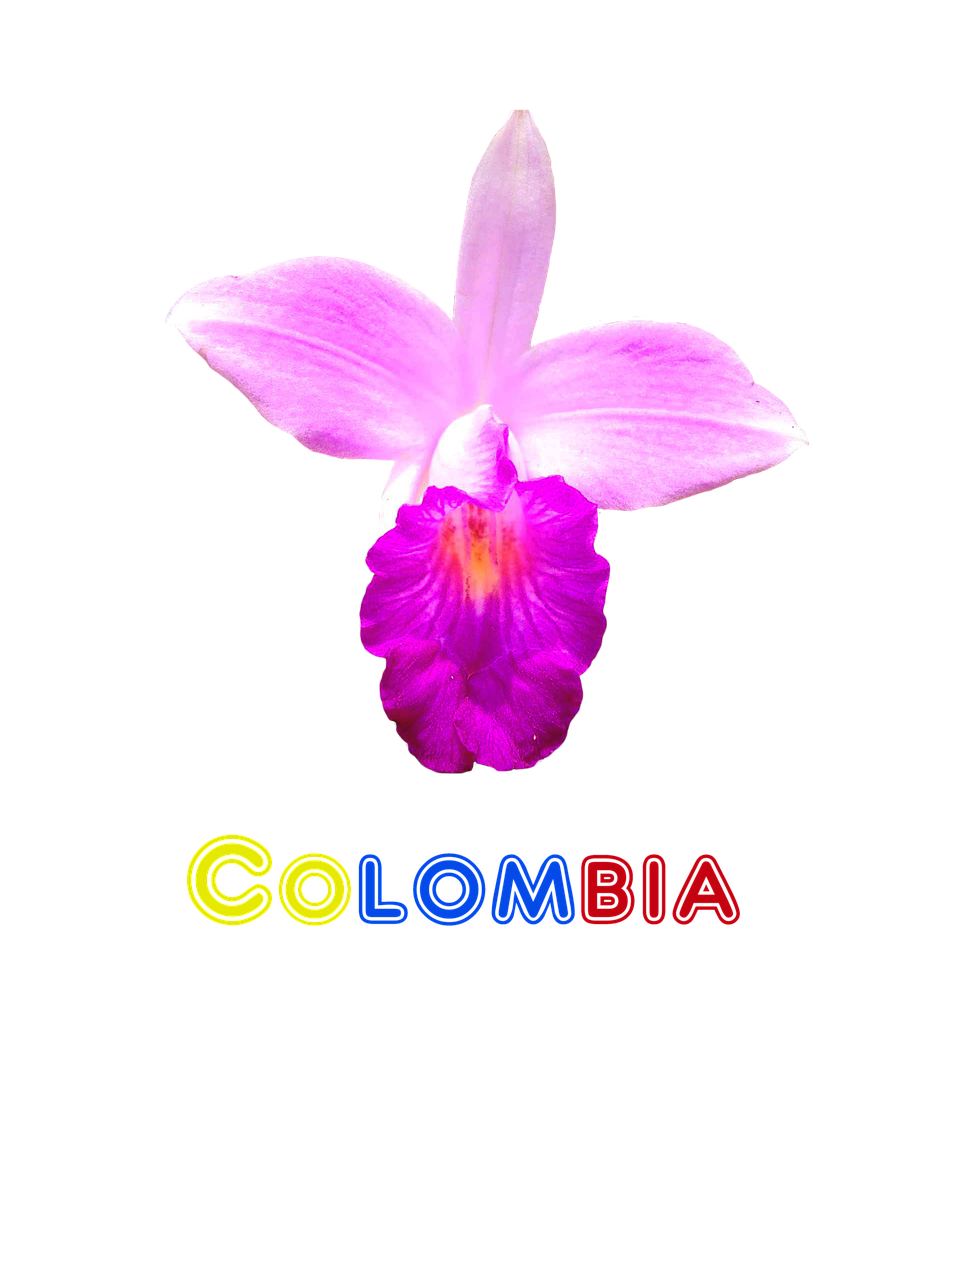 colombia flower orchid free photo